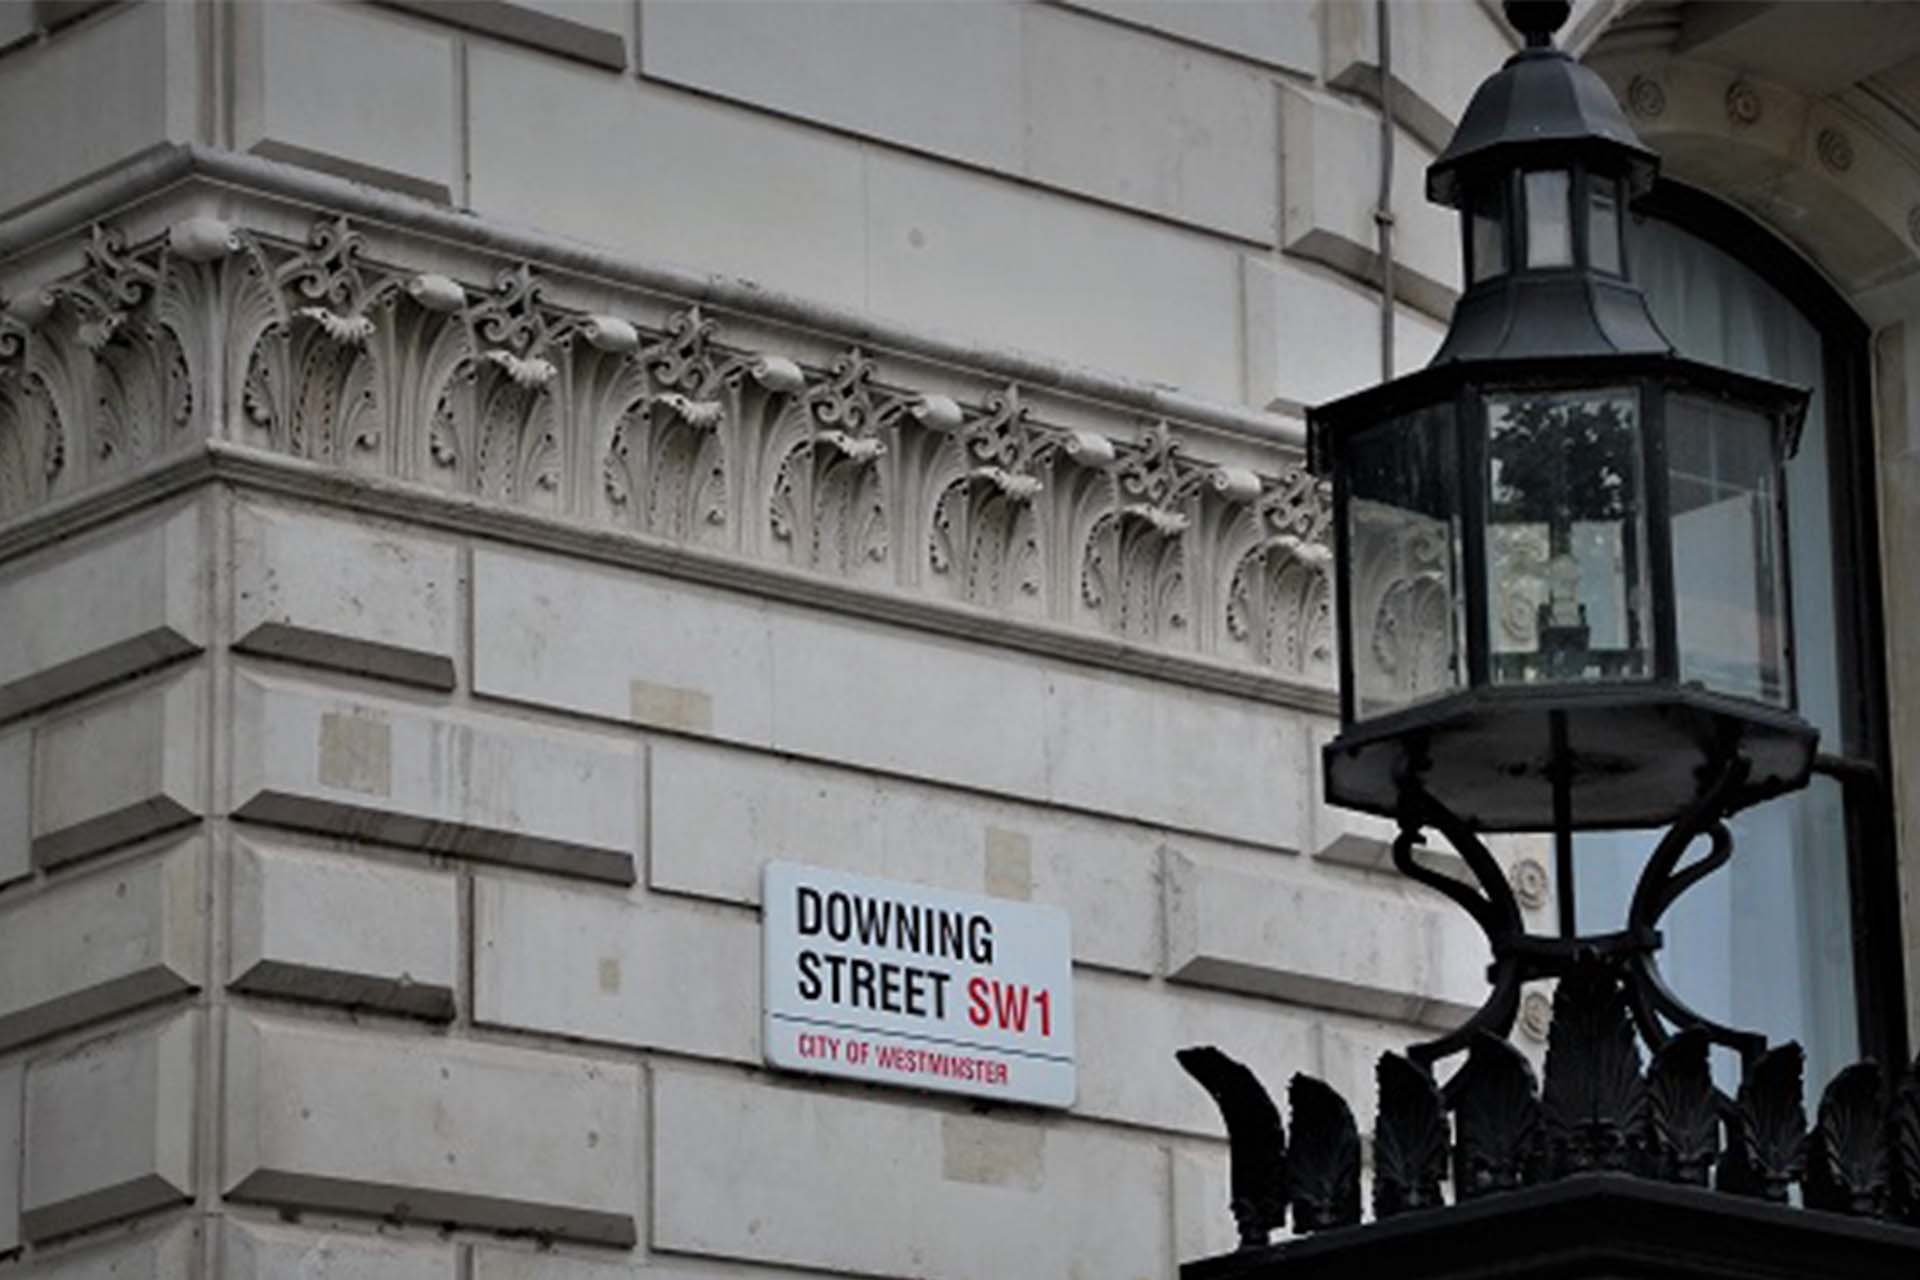 The street sign at Downing Street